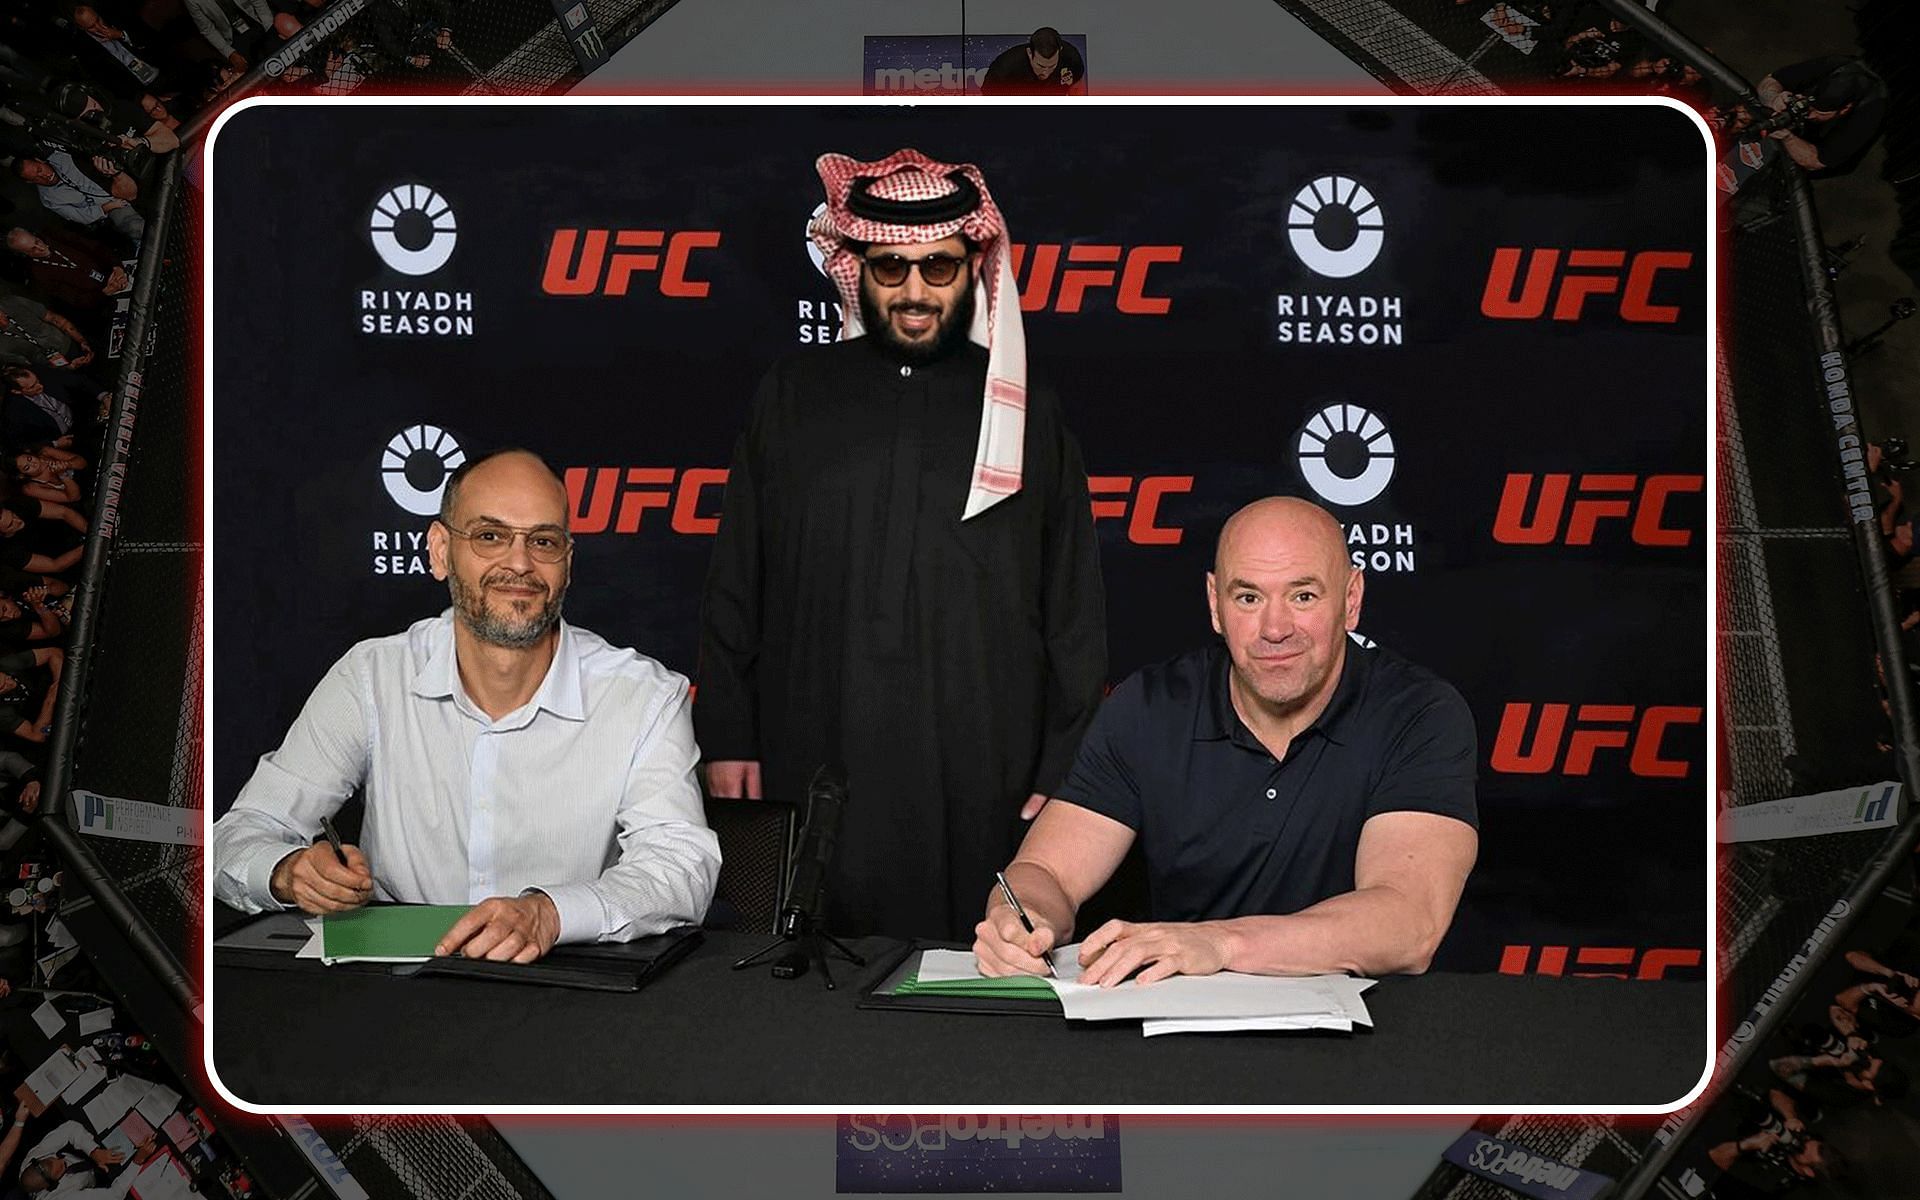 Turki Alalshikh (center) announces agreement between the UFC and Riyadh Season [Images courtesy: @turkialalshik on Instagram and Getty]